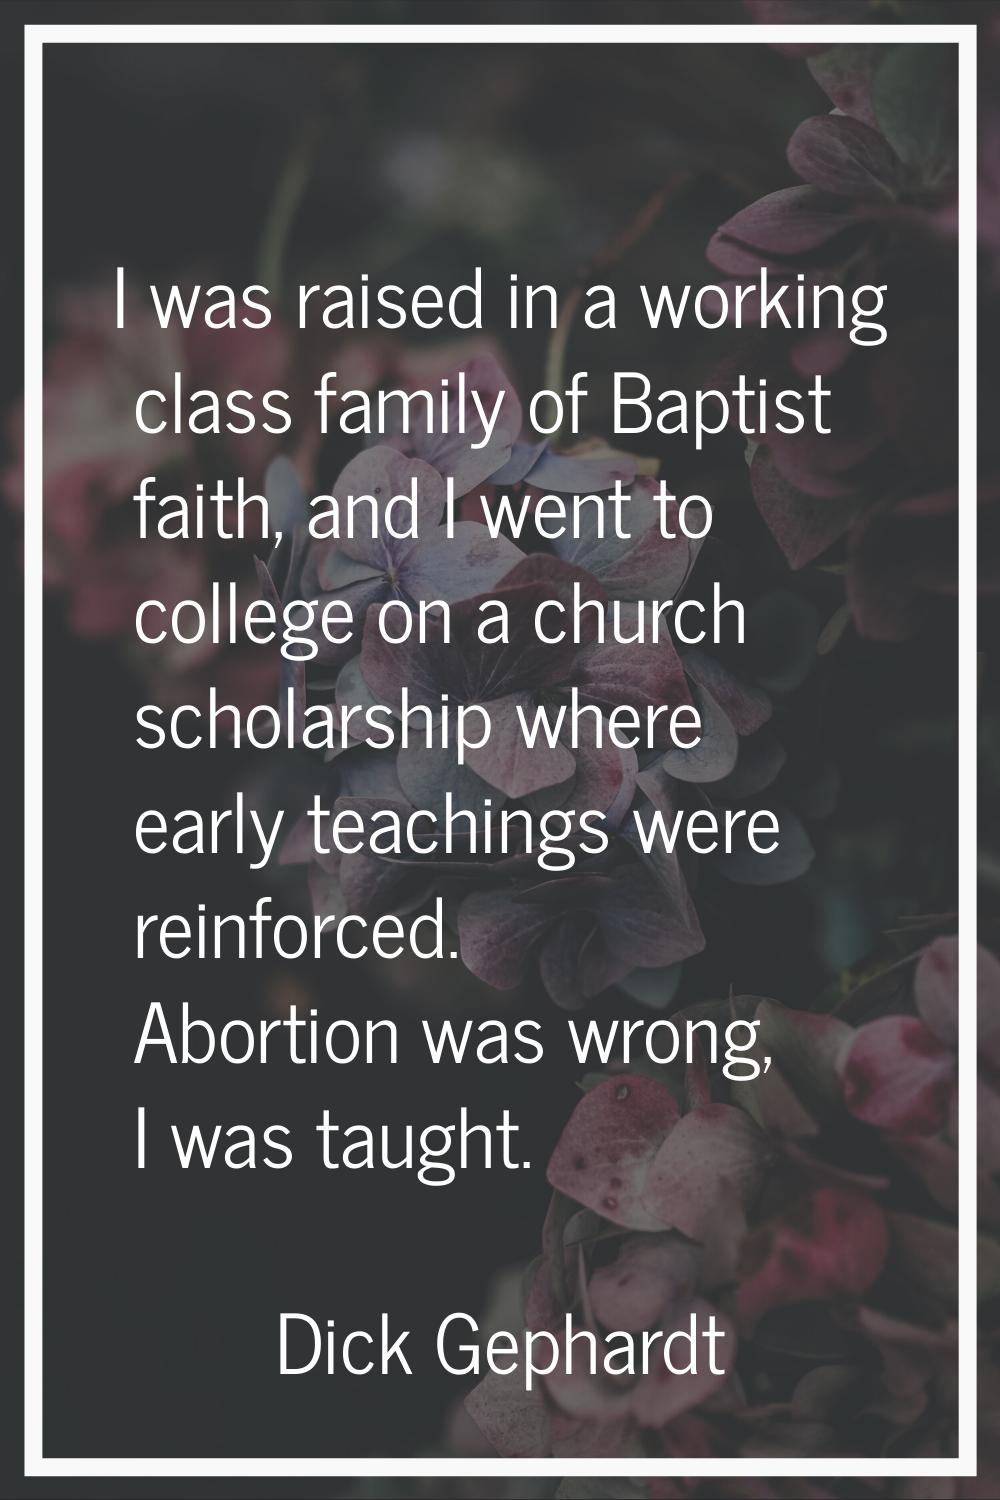 I was raised in a working class family of Baptist faith, and I went to college on a church scholars